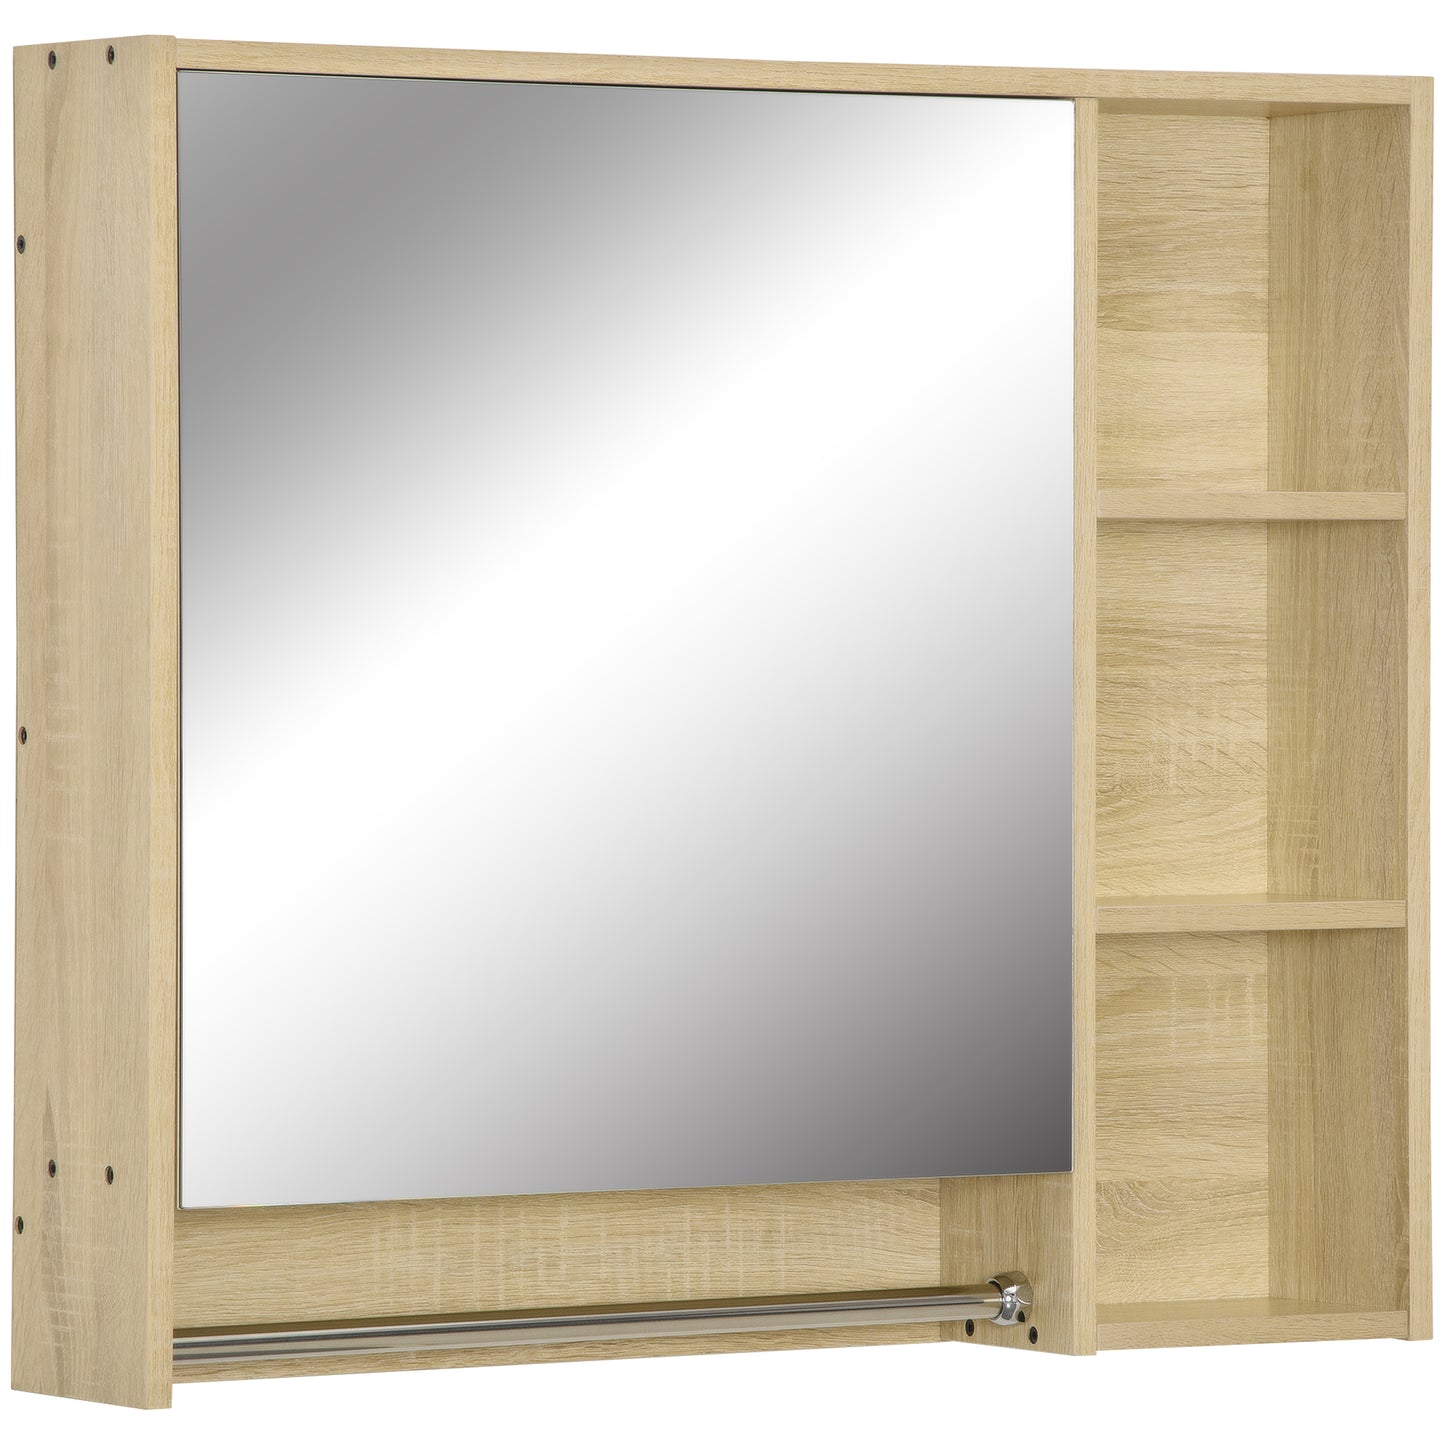 kleankin Wall Mounted Medicine Cabinet, 31.5"W x 27.5"H Bathroom Mirror Cabinet with Tower Bar, Single Mirrored Door, Shelves, Natural